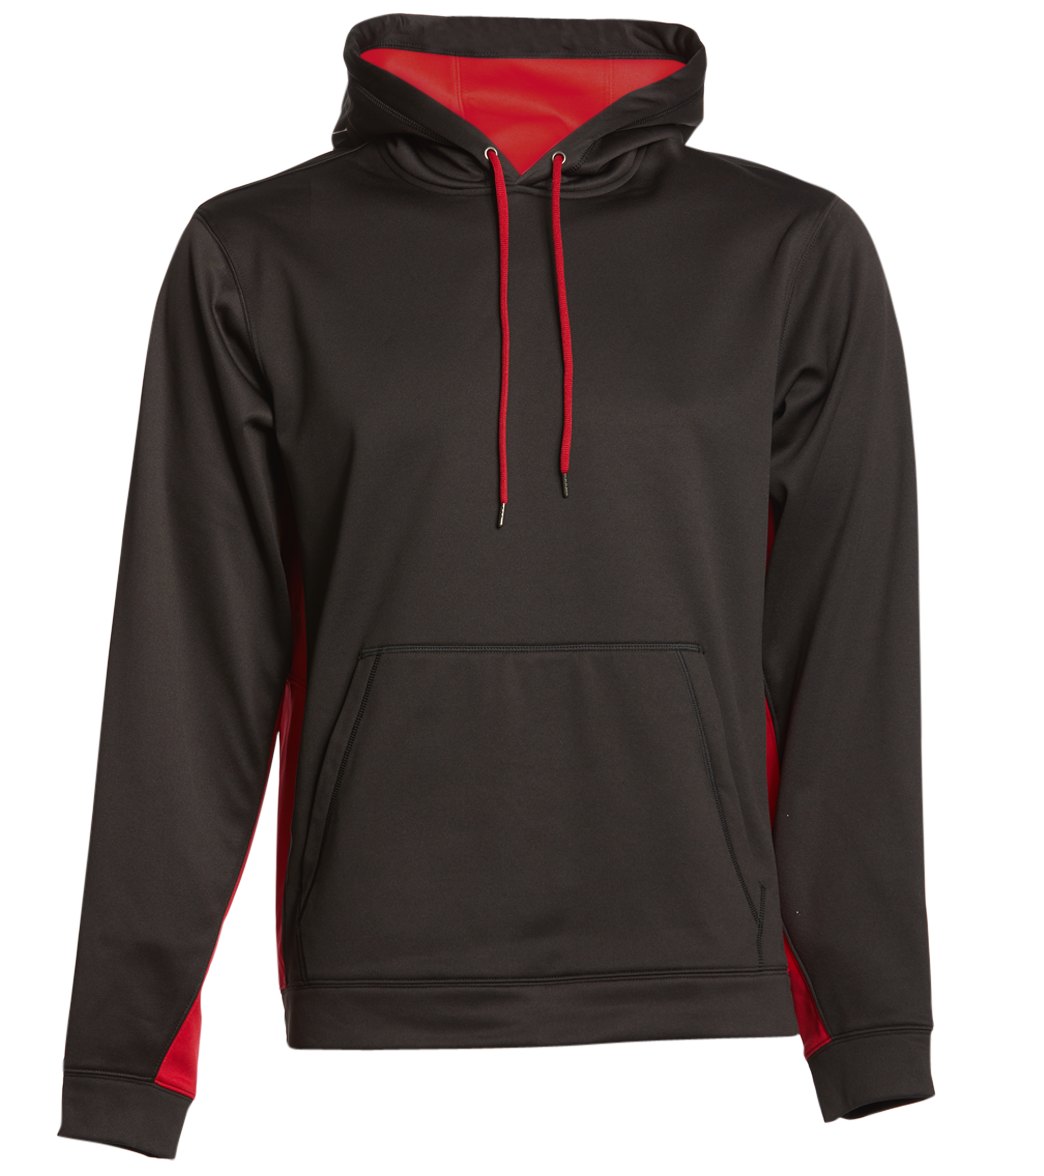 Sport-Wick Fleece Colorblock Hooded Pullover - Black/Deep Red Xl Polyester - Swimoutlet.com